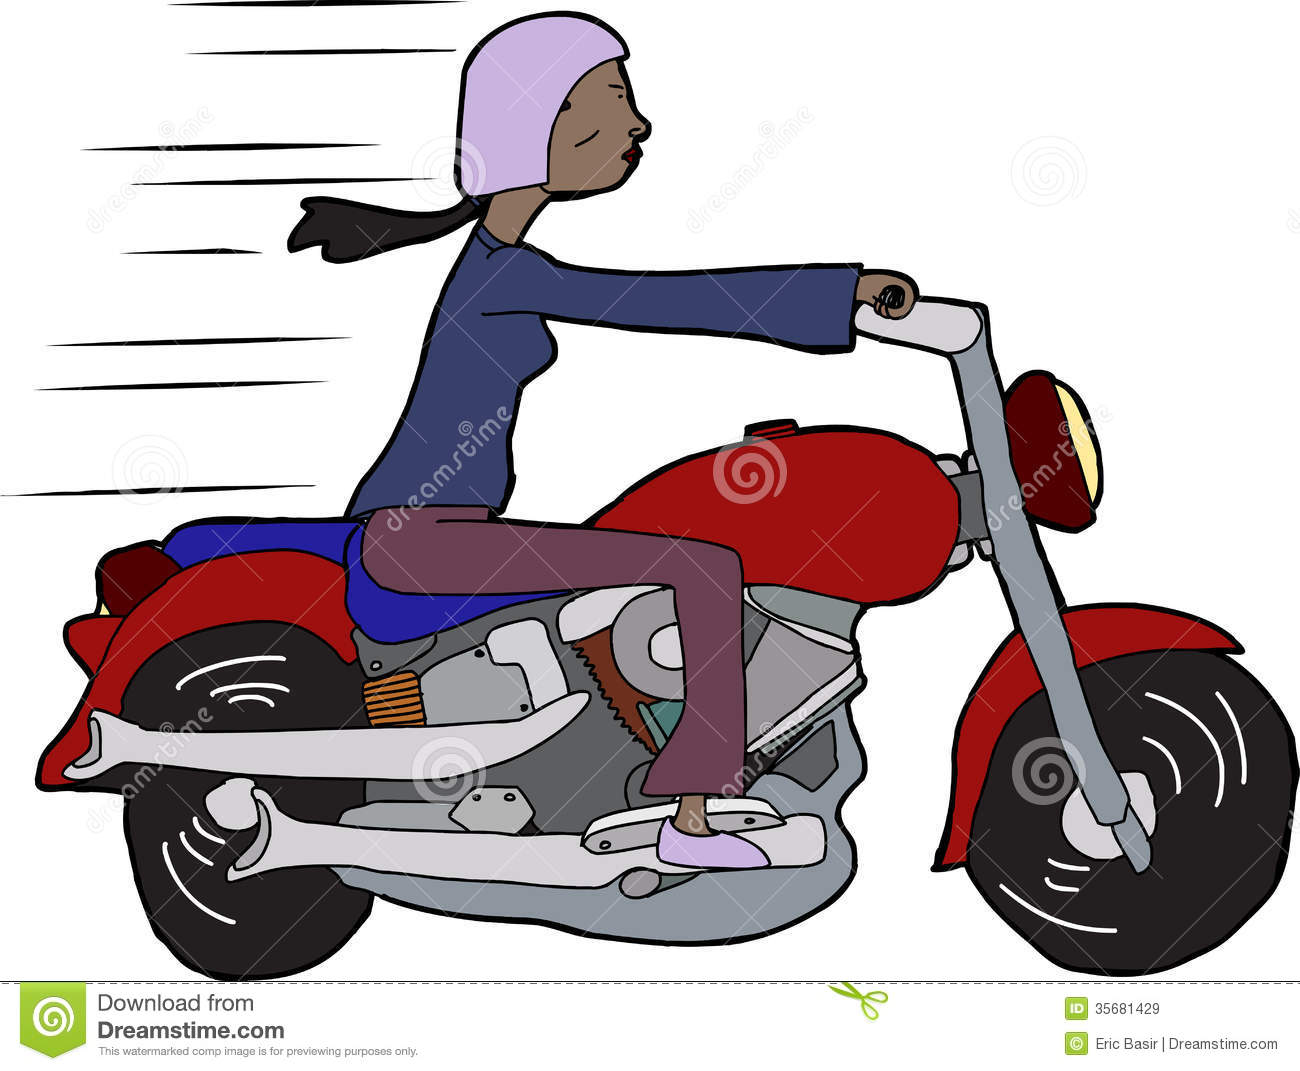 Motorcycle riding clipart.